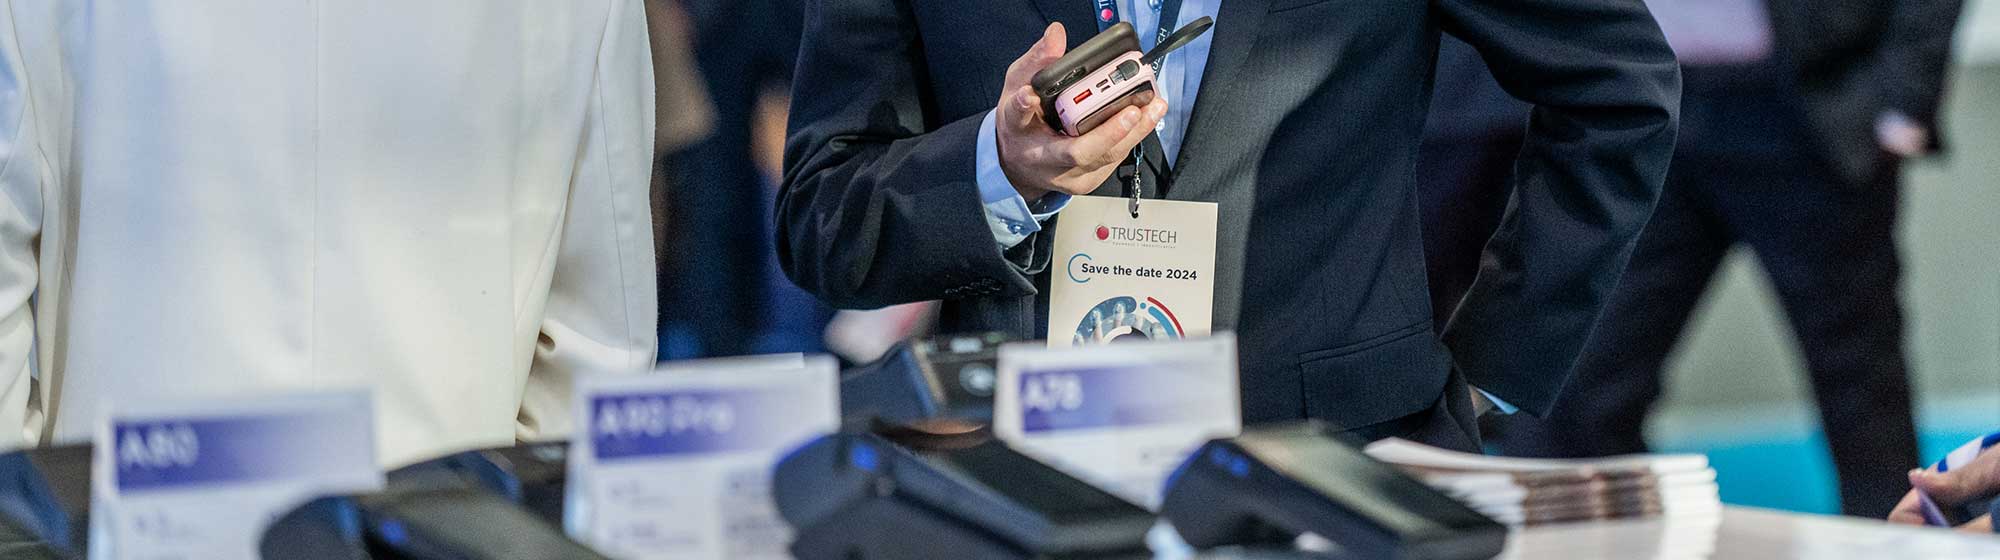 A businessman, with a Trustech badge around his neck, is looking at something off-screen, holding his phone in his hand. He is surrounded by a crowd of other visitors. Payment terminals are displayed in front of him.